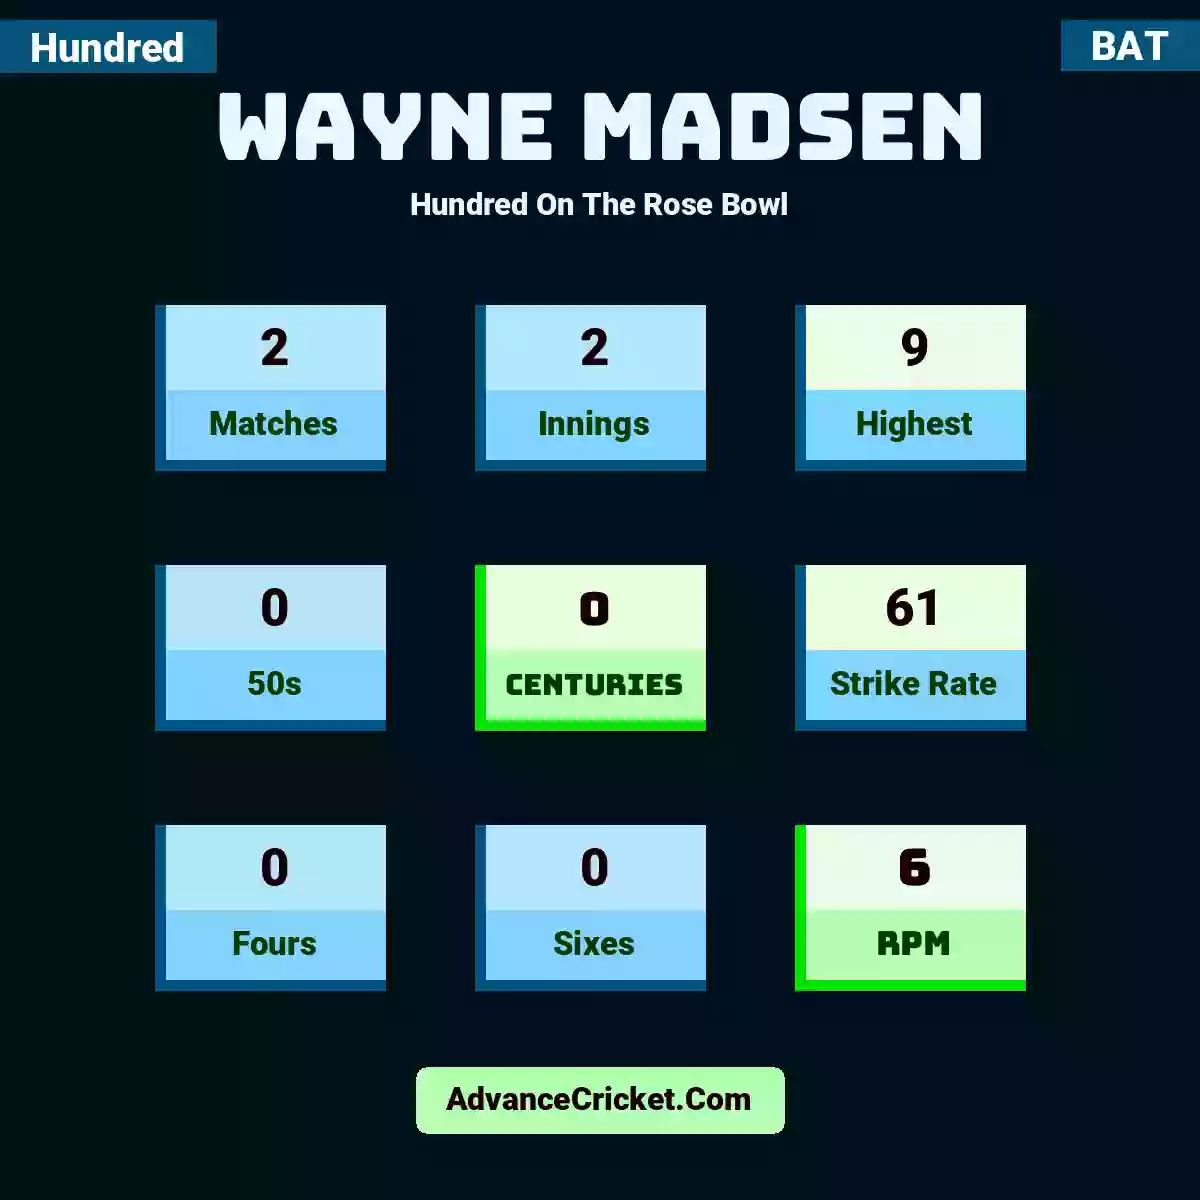 Wayne Madsen Hundred  On The Rose Bowl, Wayne Madsen played 2 matches, scored 9 runs as highest, 0 half-centuries, and 0 centuries, with a strike rate of 61. W.Madsen hit 0 fours and 0 sixes, with an RPM of 6.